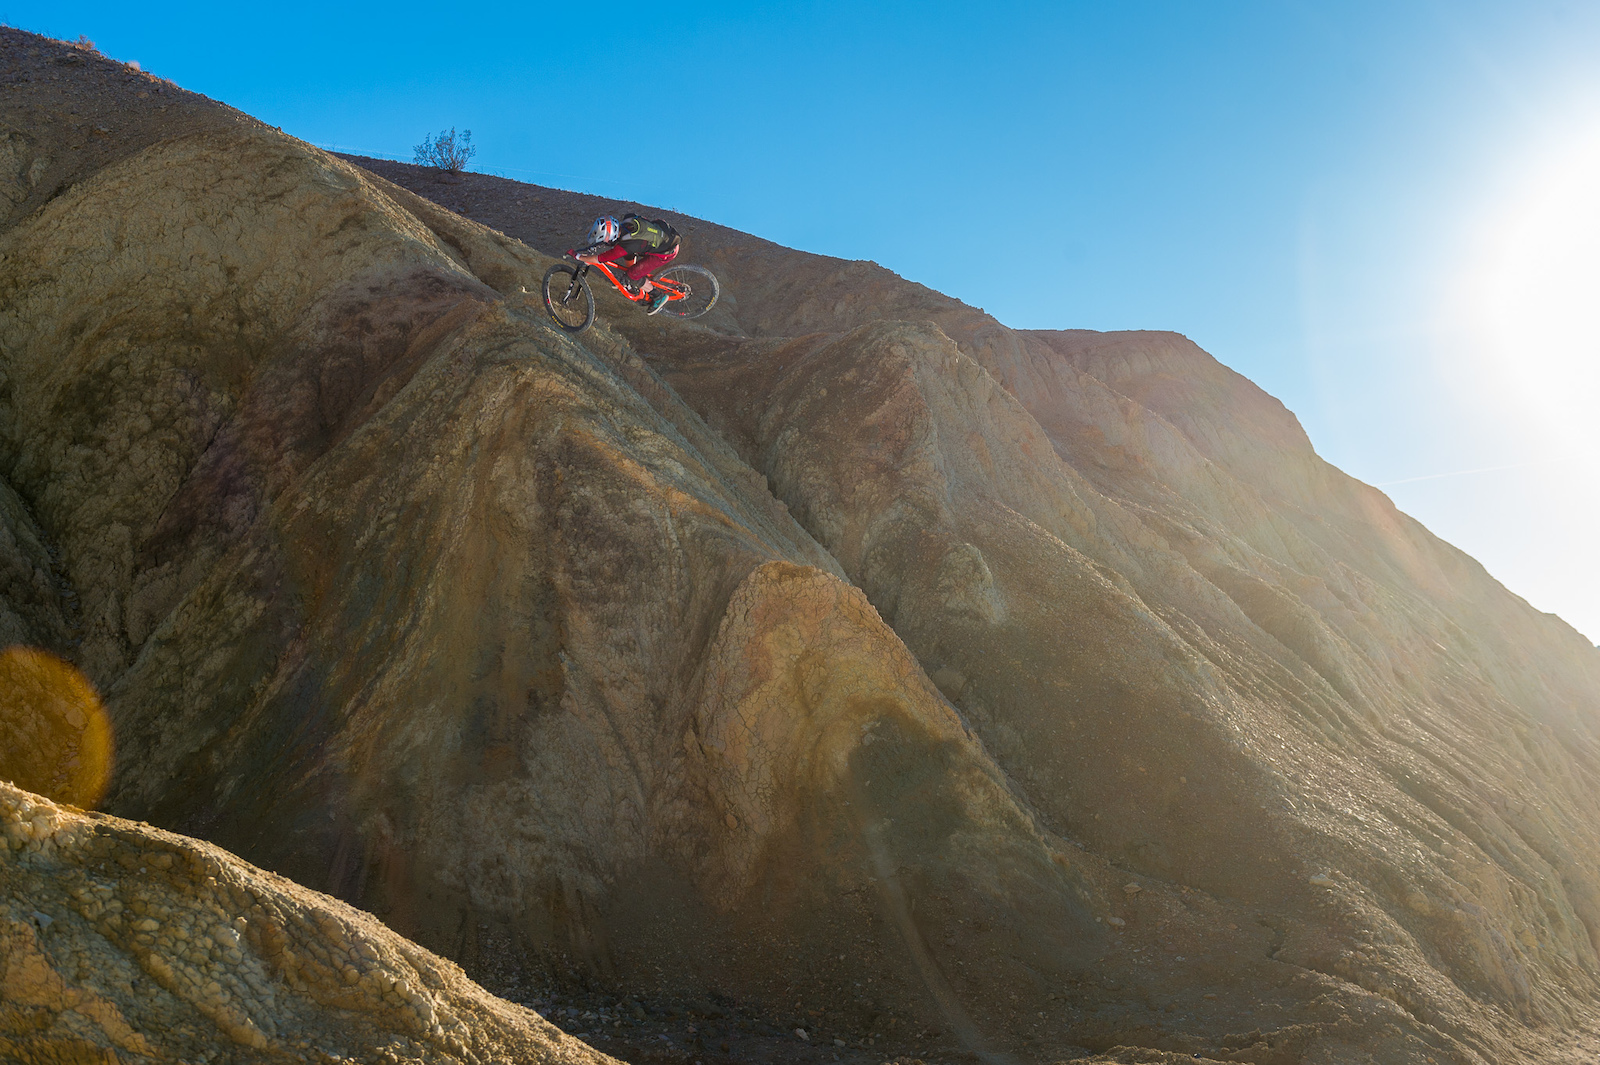 Mining for Nugs - Some of the rad photos Kirt and I got while filming for the Niner bikes video.